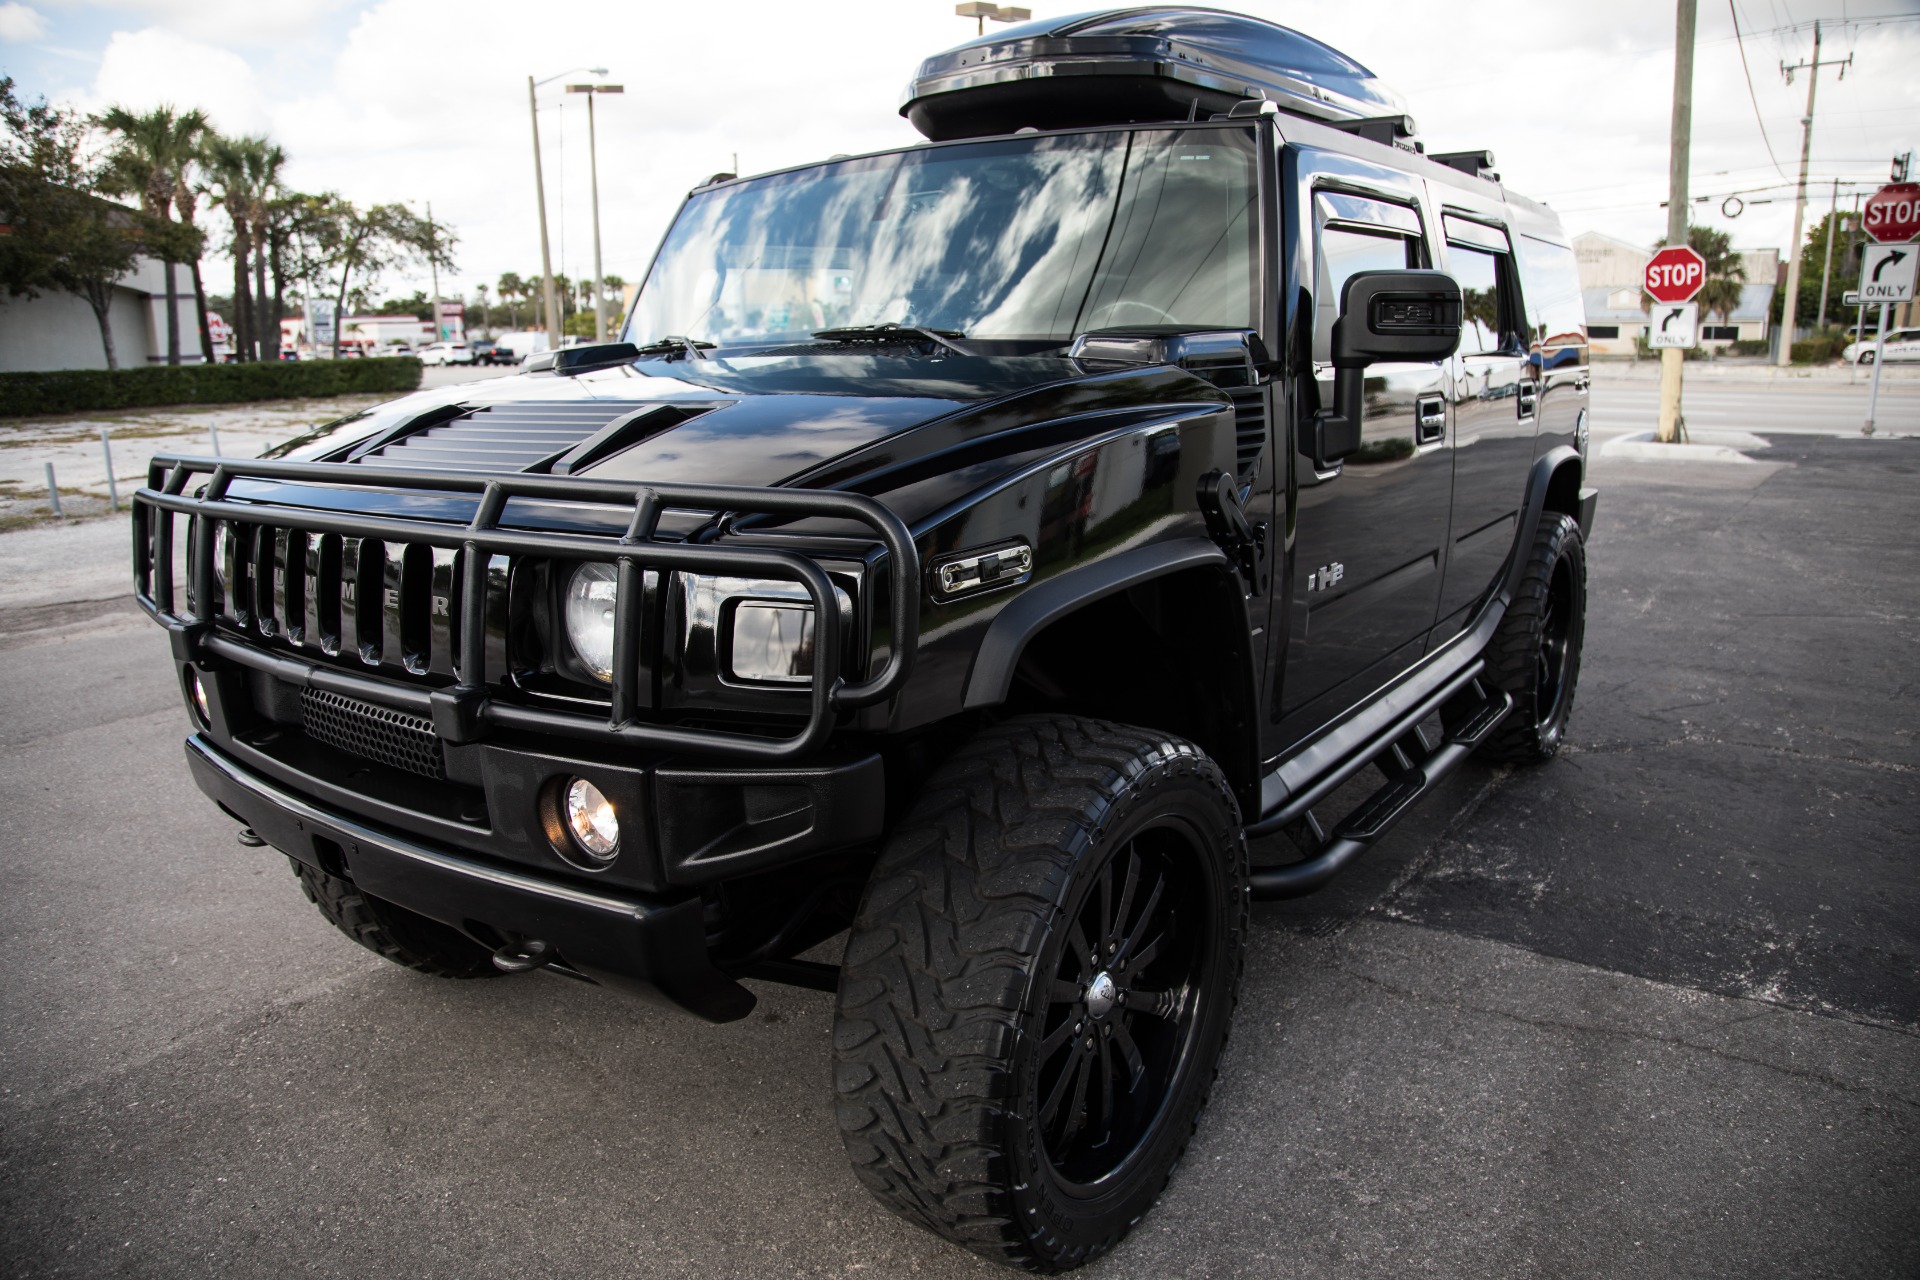 Used 2008 HUMMER H2 Luxury For Sale ($54,900) | Marino Performance ...